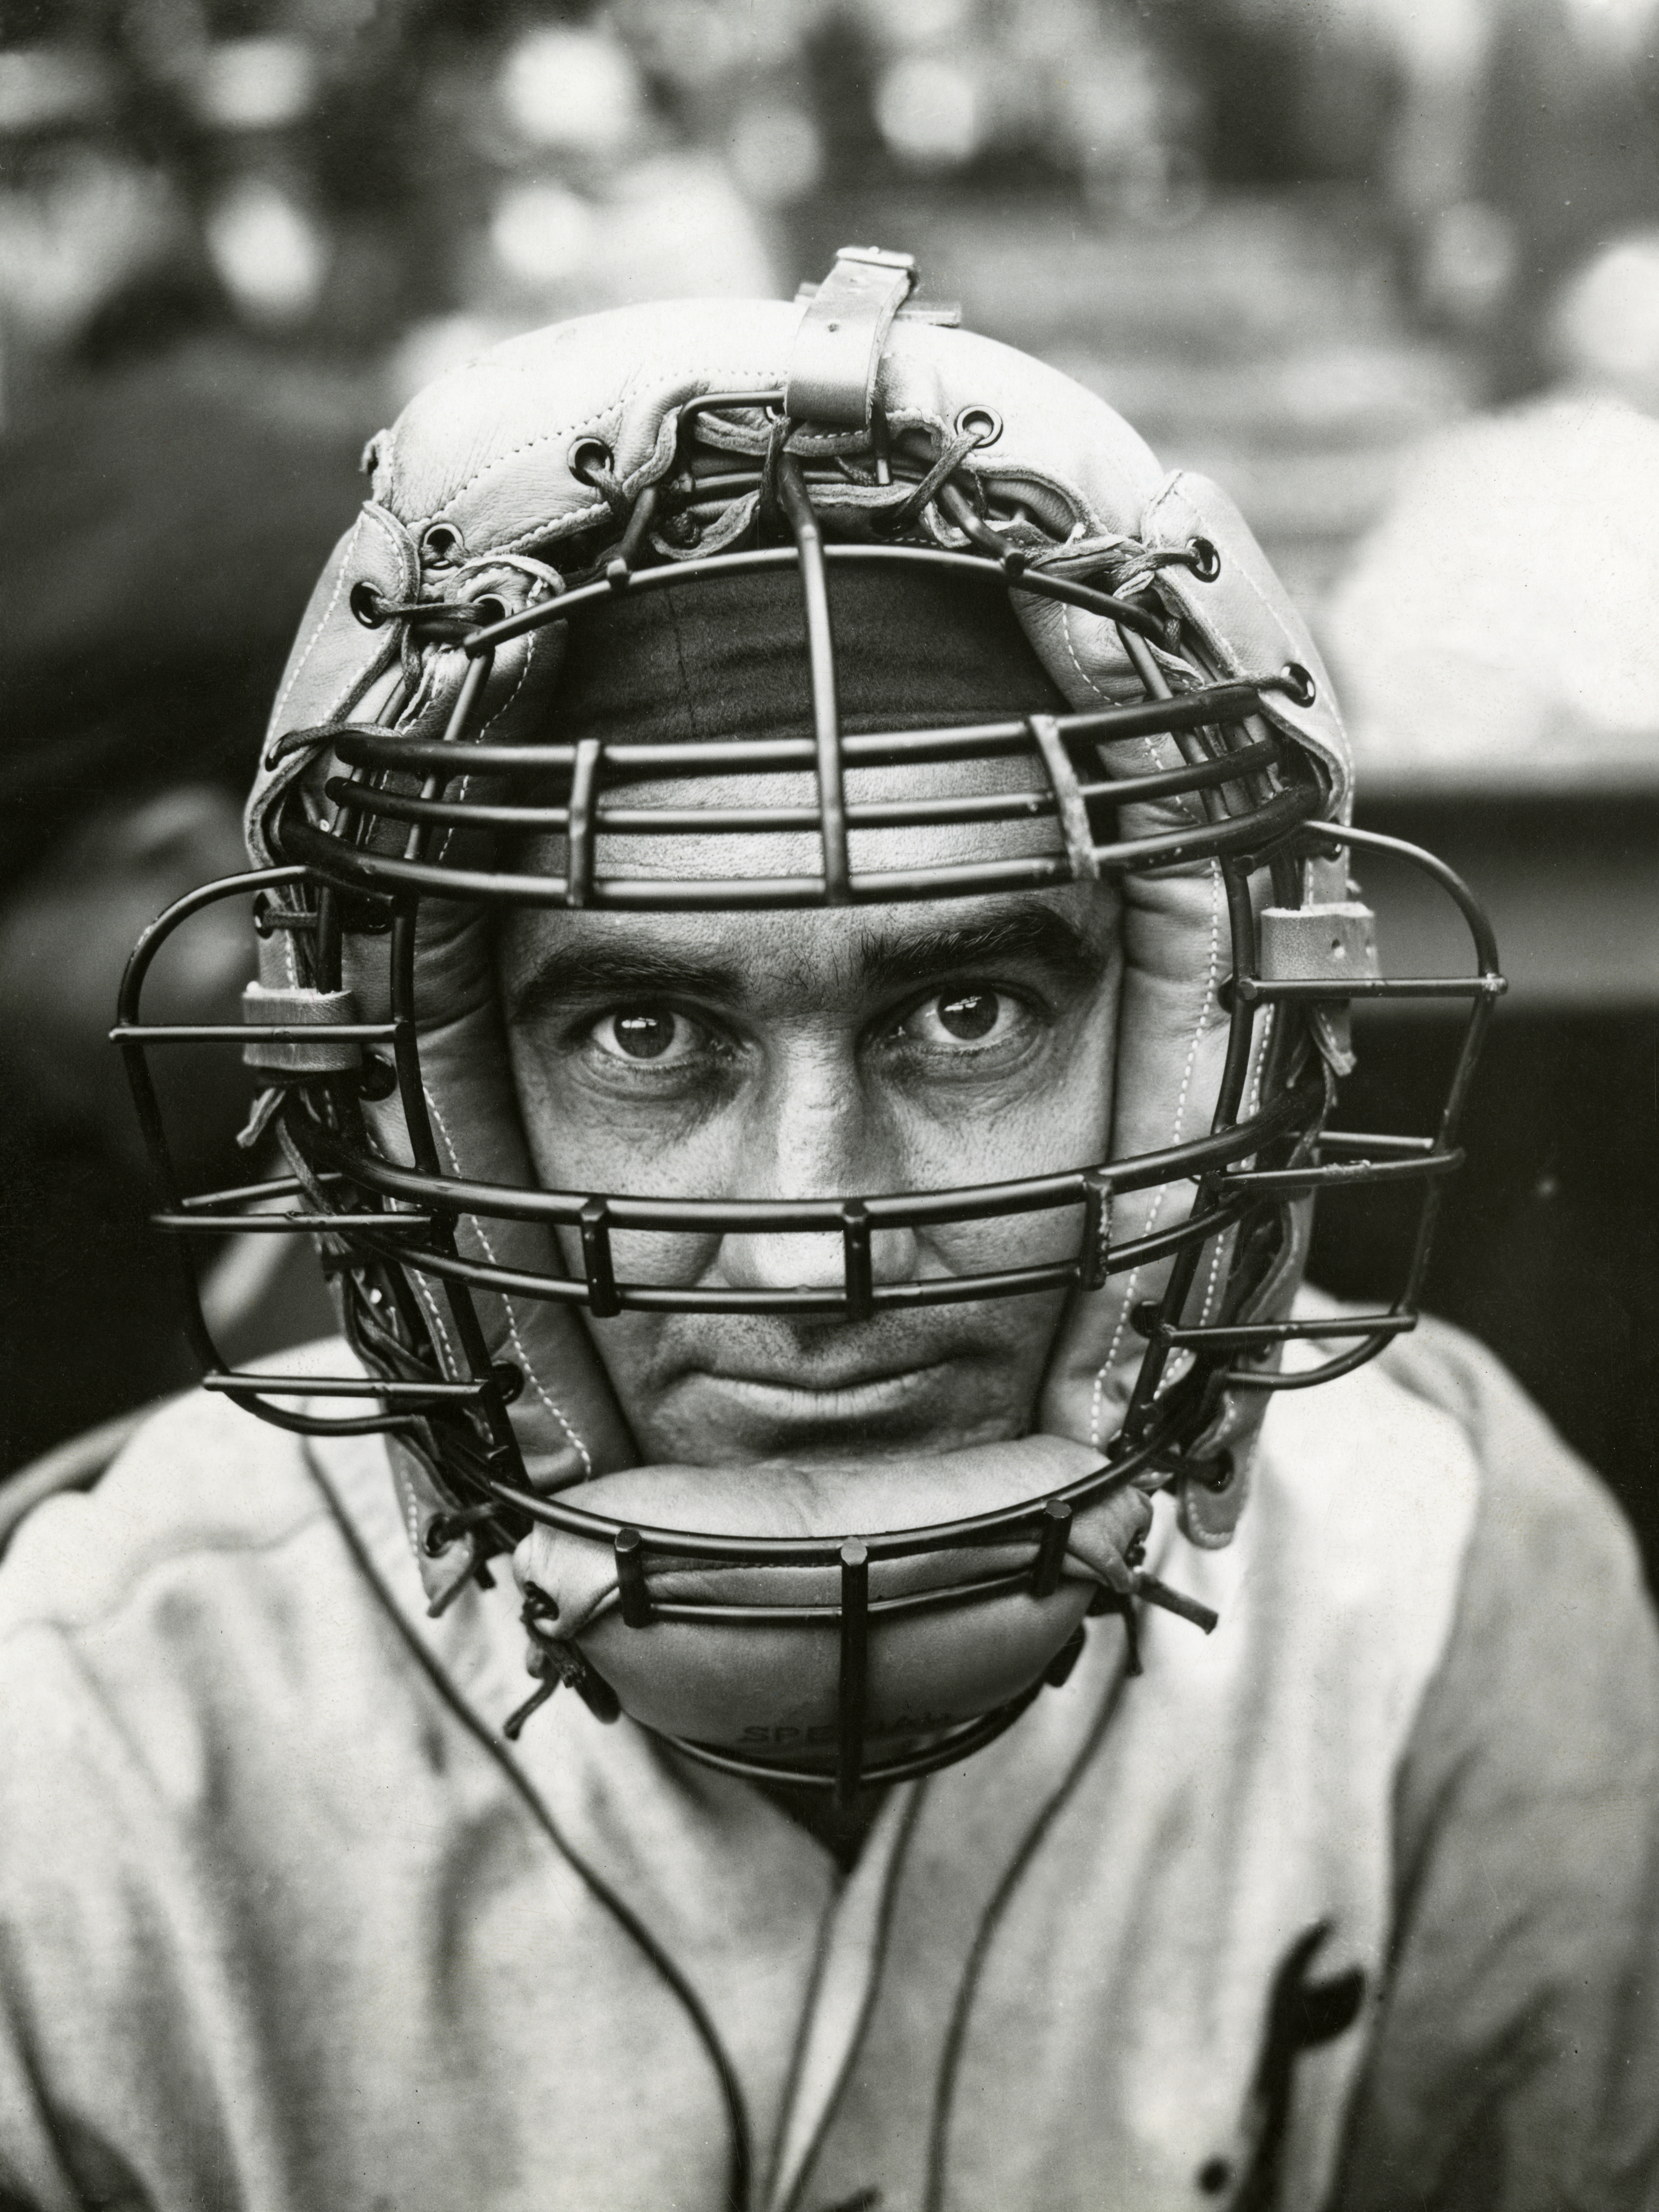 Just months prior to being named American League Most Valuable Player, Detroit Tigers catcher Mickey Cochrane gazes out from behind his mask at Philadelphia's Shibe Park, Aug. 29, 1934.